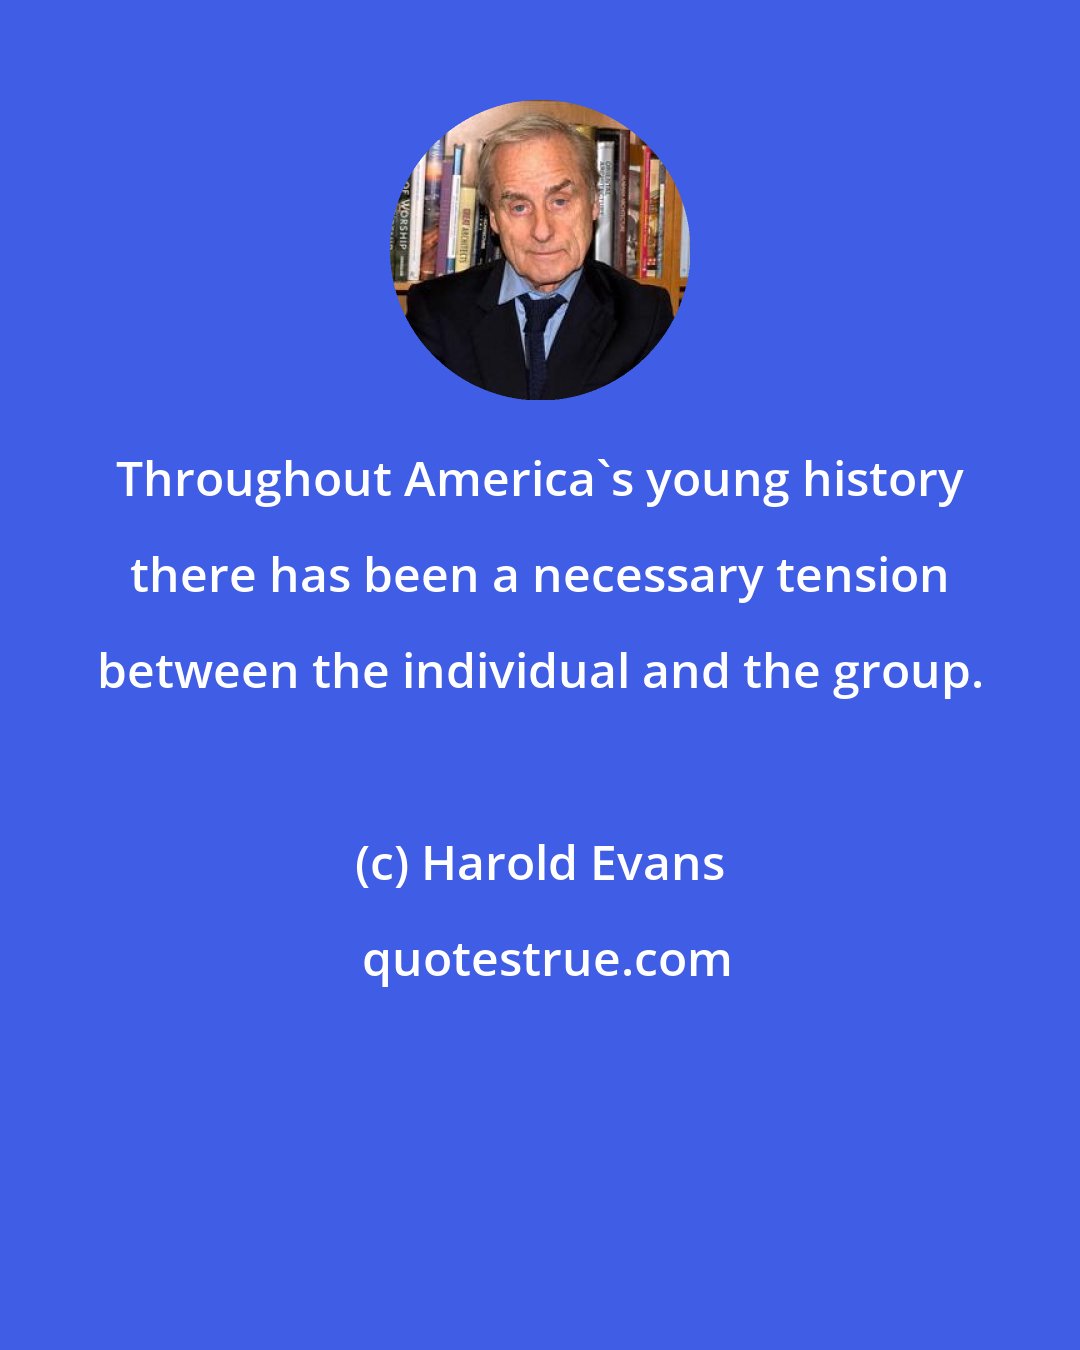 Harold Evans: Throughout America's young history there has been a necessary tension between the individual and the group.